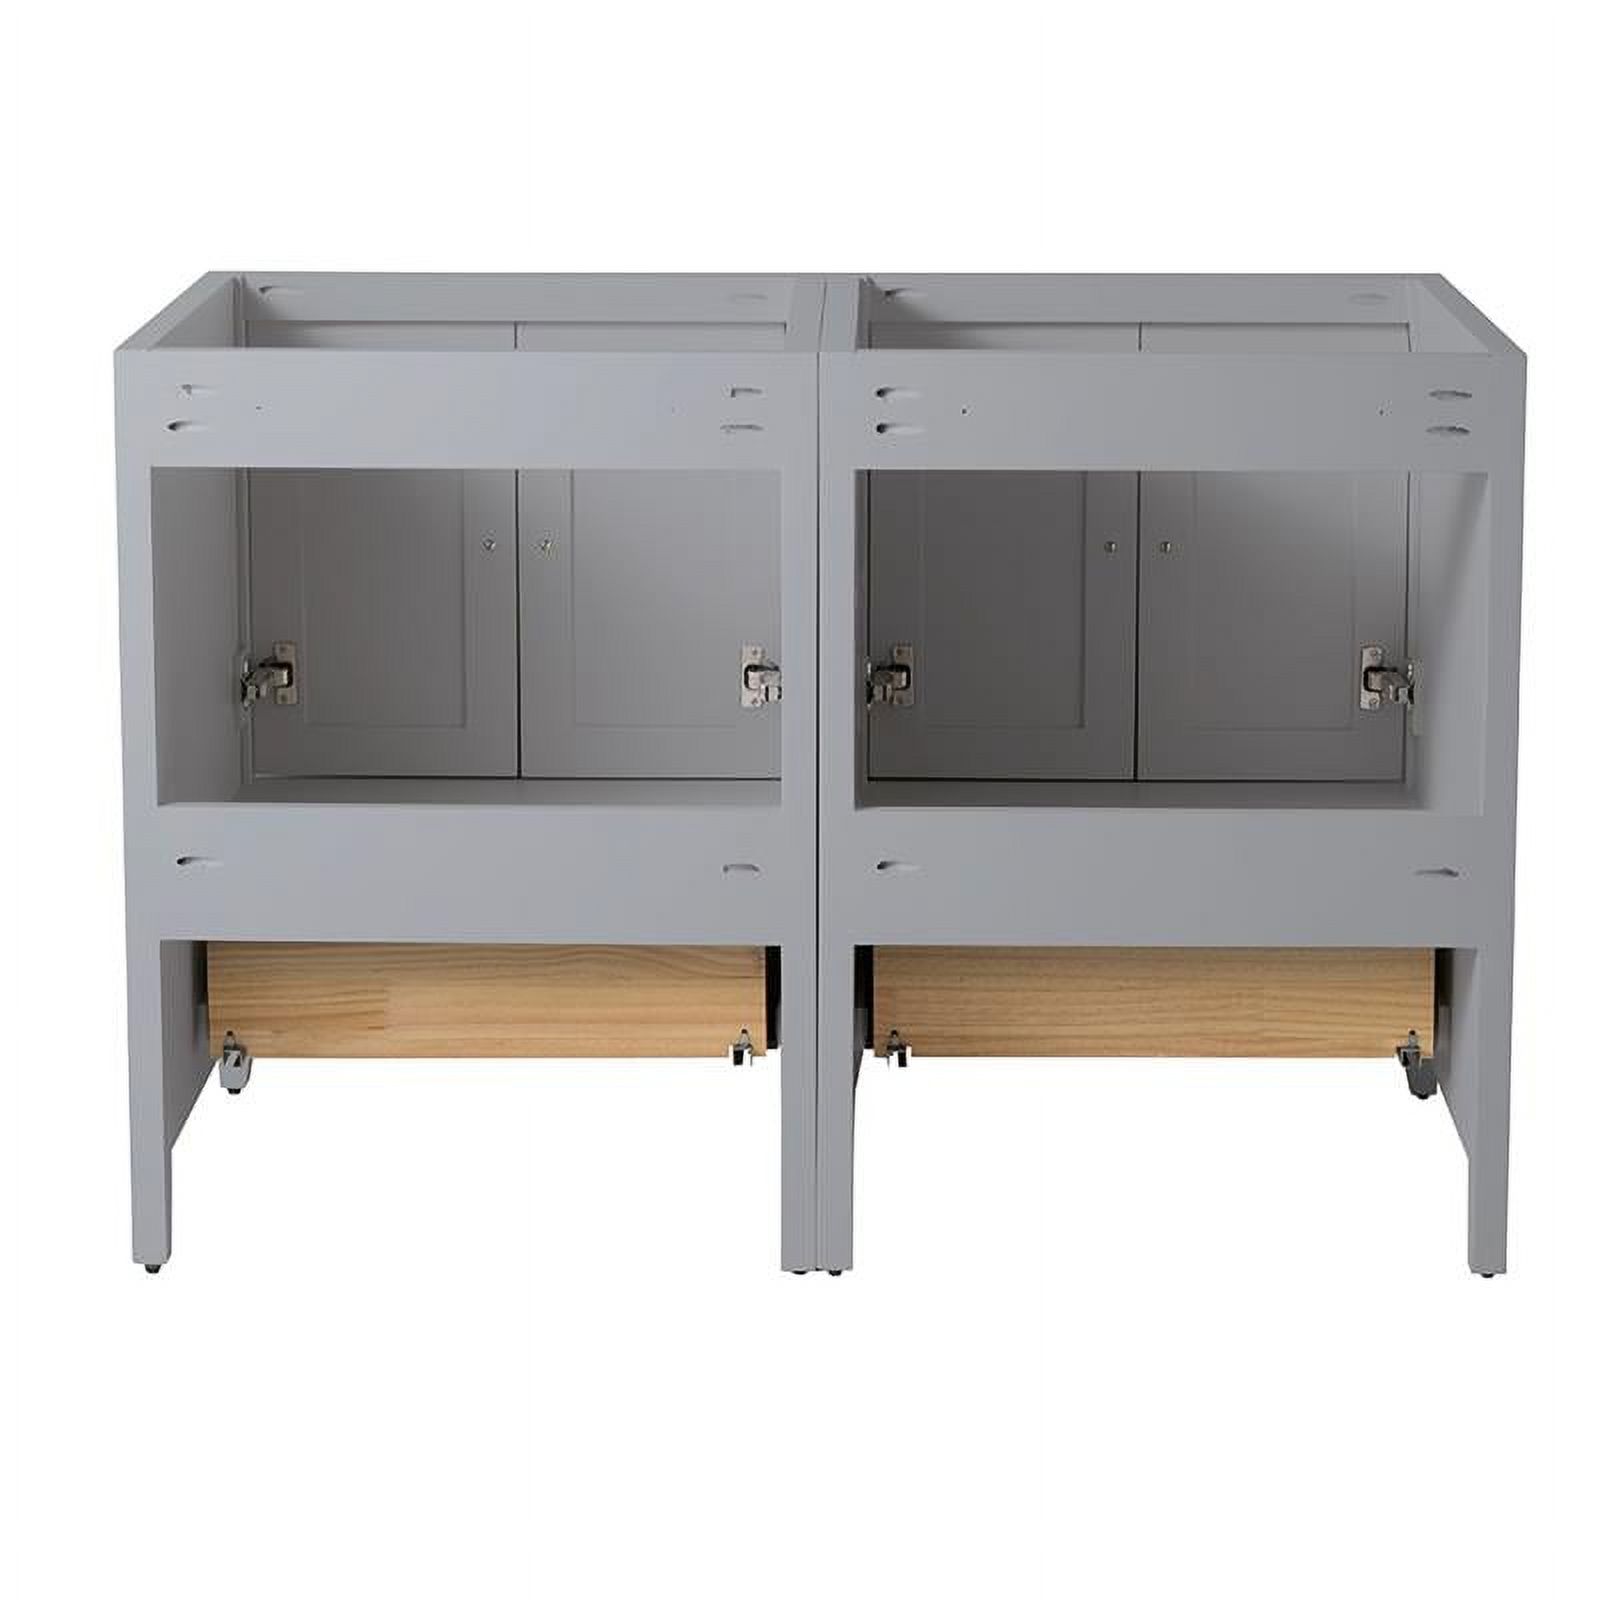 Fresca Oxford 48" Double Sinks Traditional Wood Bathroom Cabinet in Gray - image 4 of 4